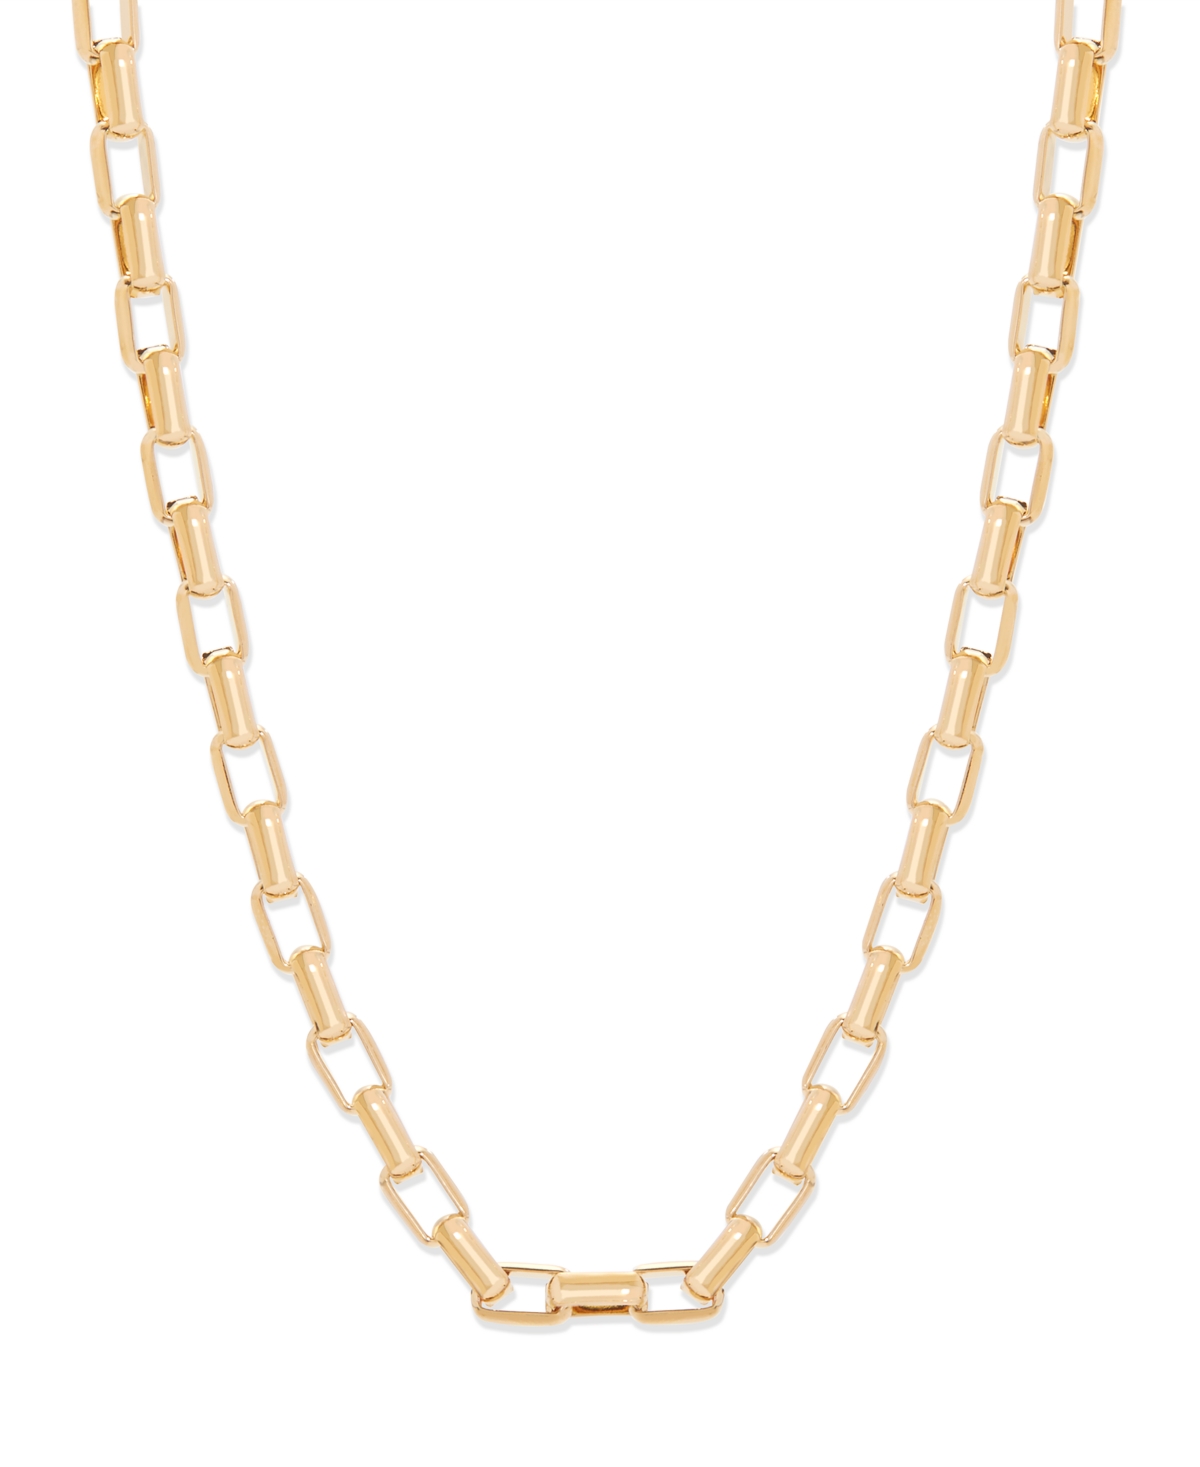 Brook & York 14k Gold-plated Marci Chain Necklace